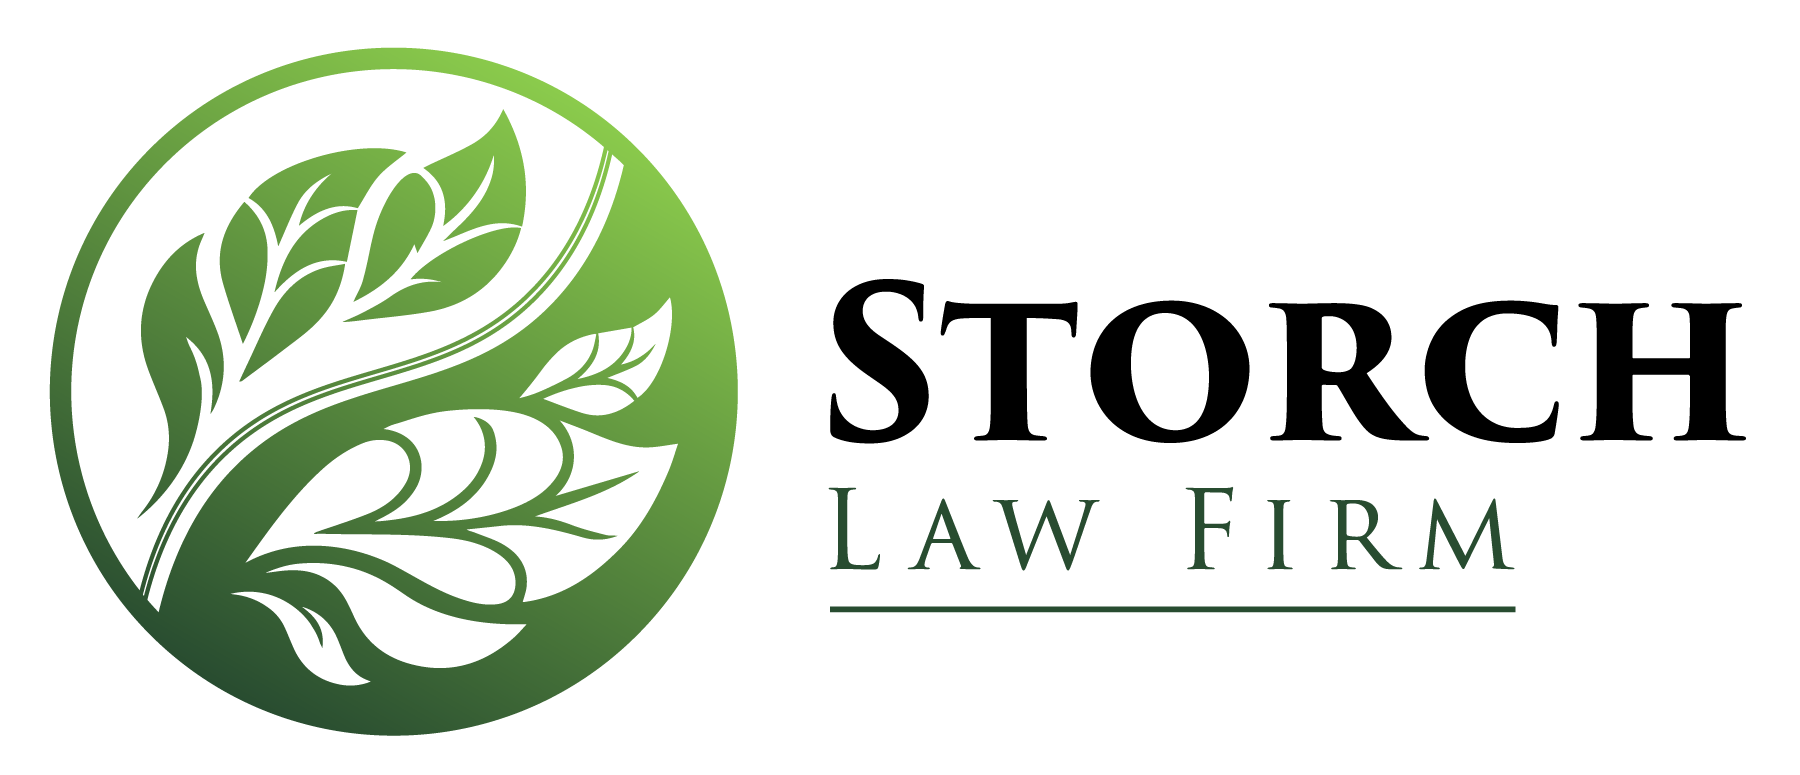 CX-110154_Storch Law Firm_Final